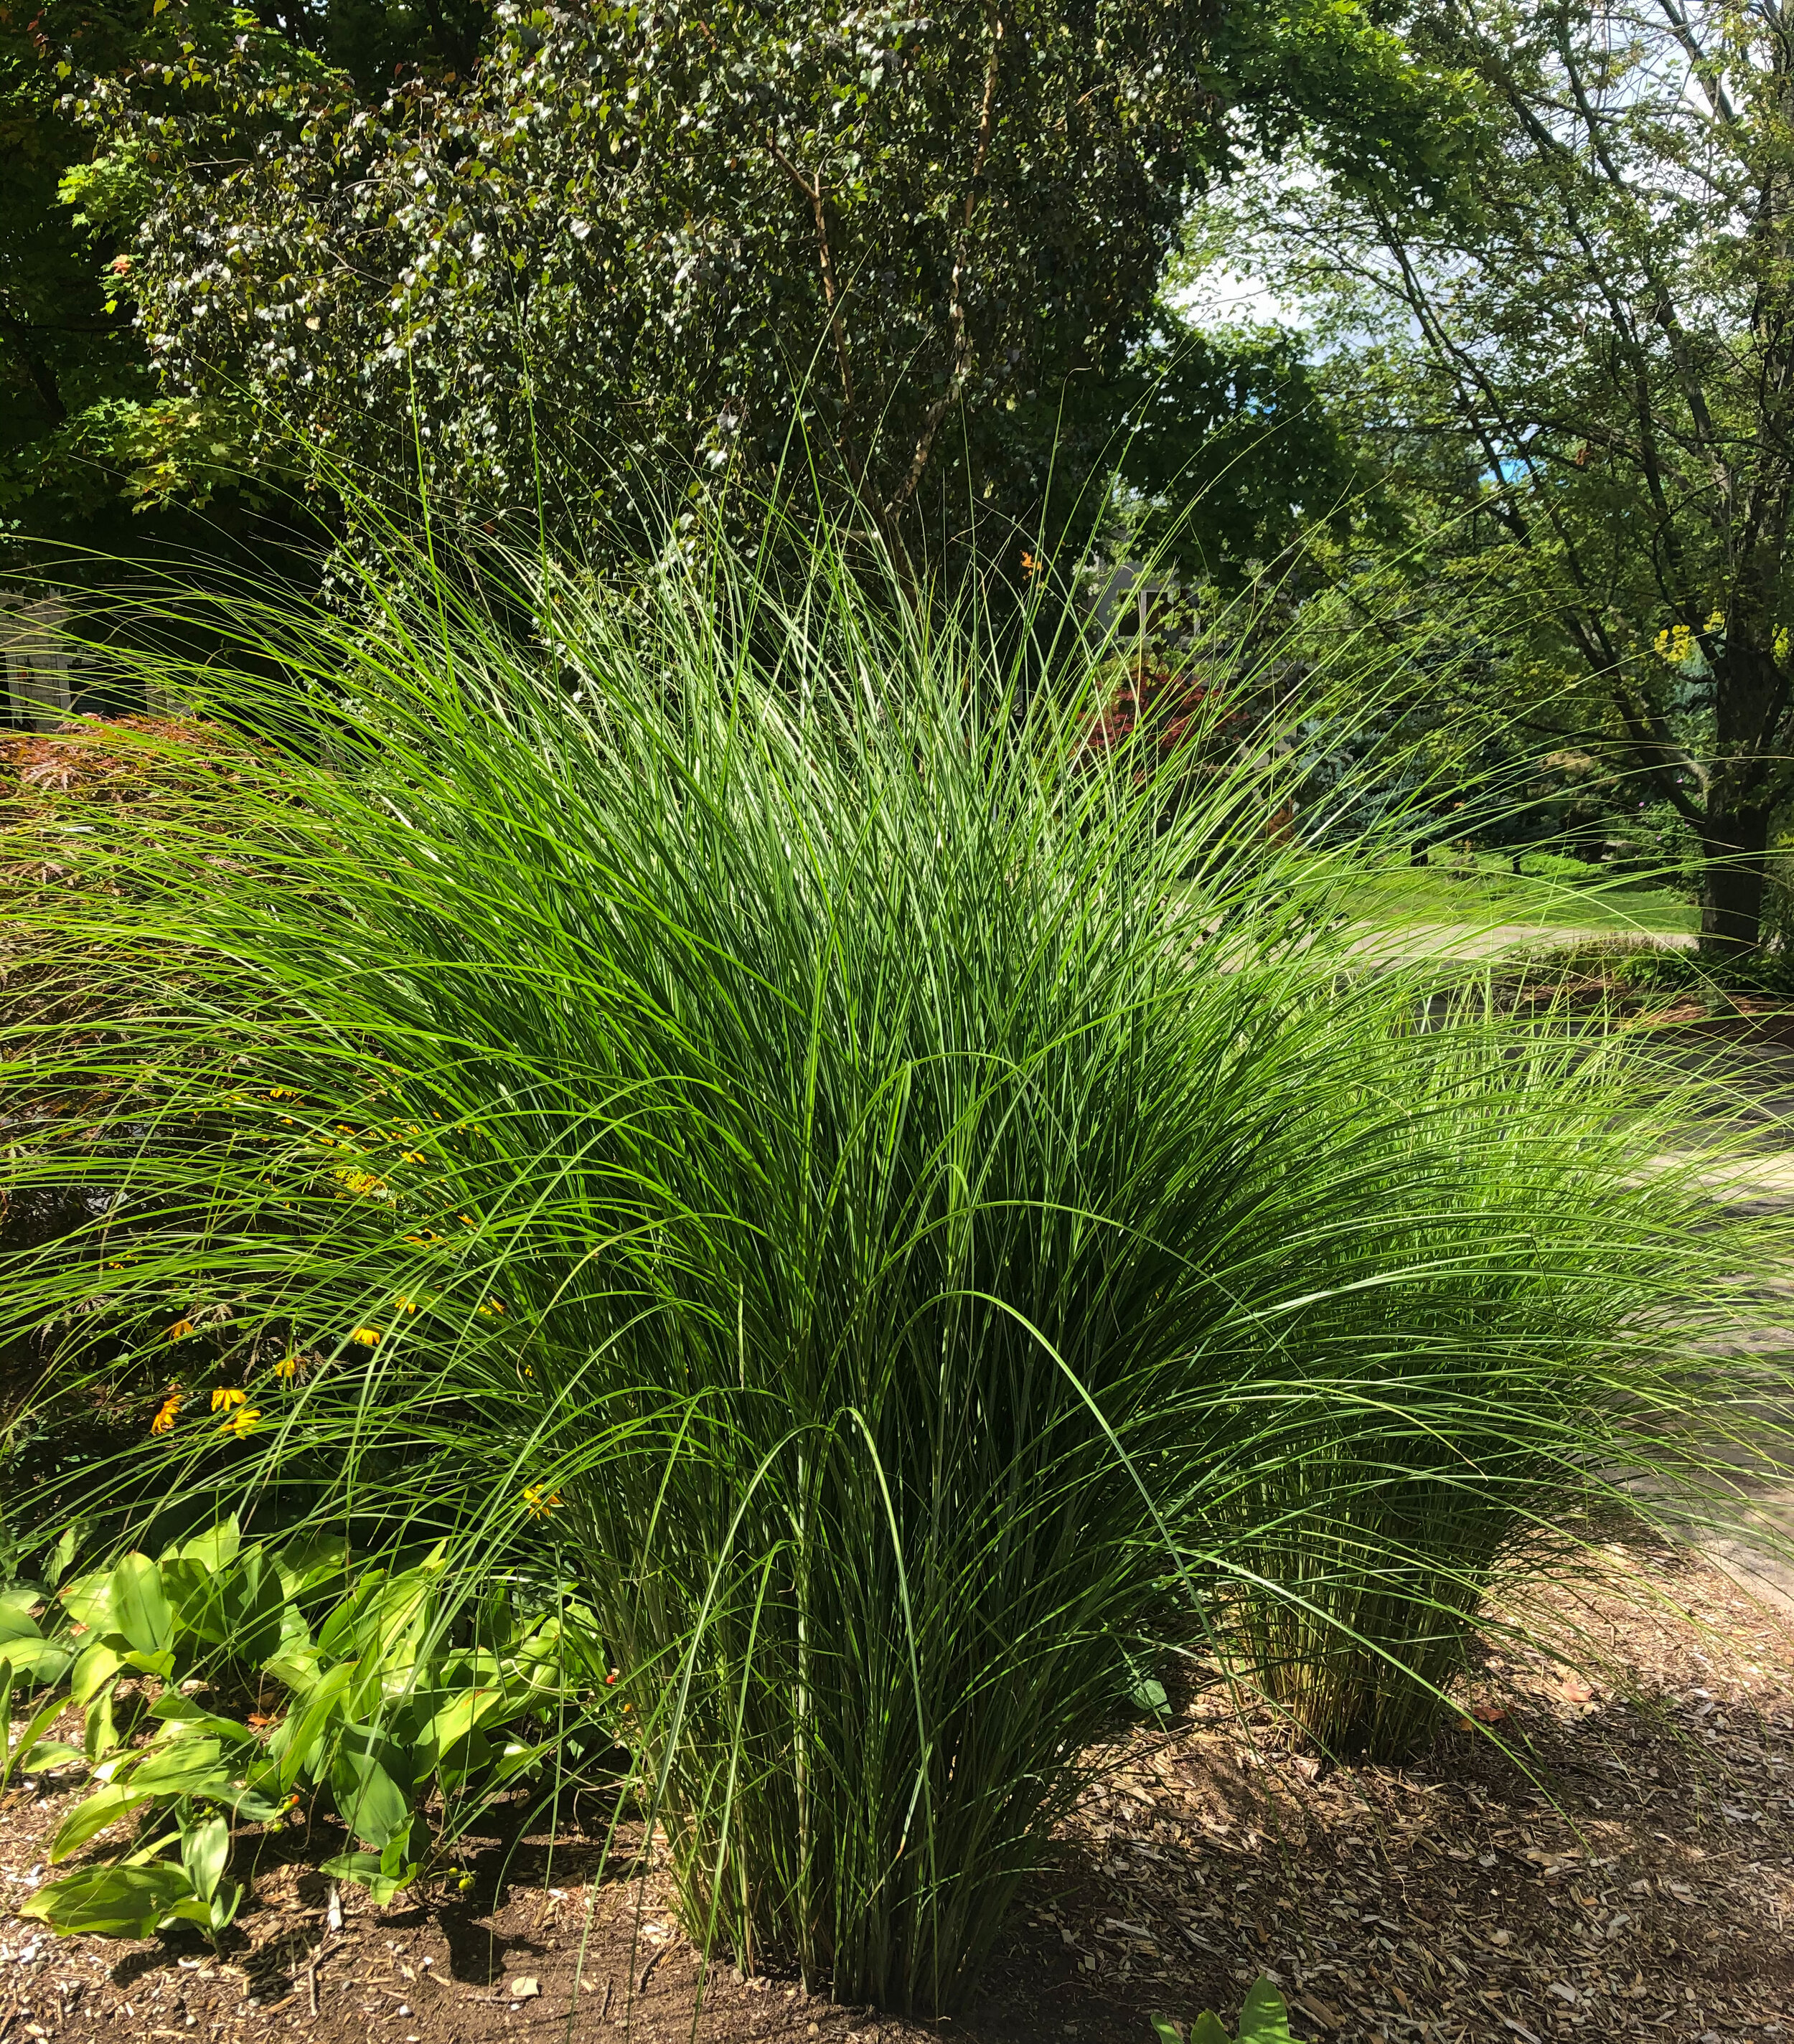 Miscanthus Sinensis forms an elegant clump in our front garden.